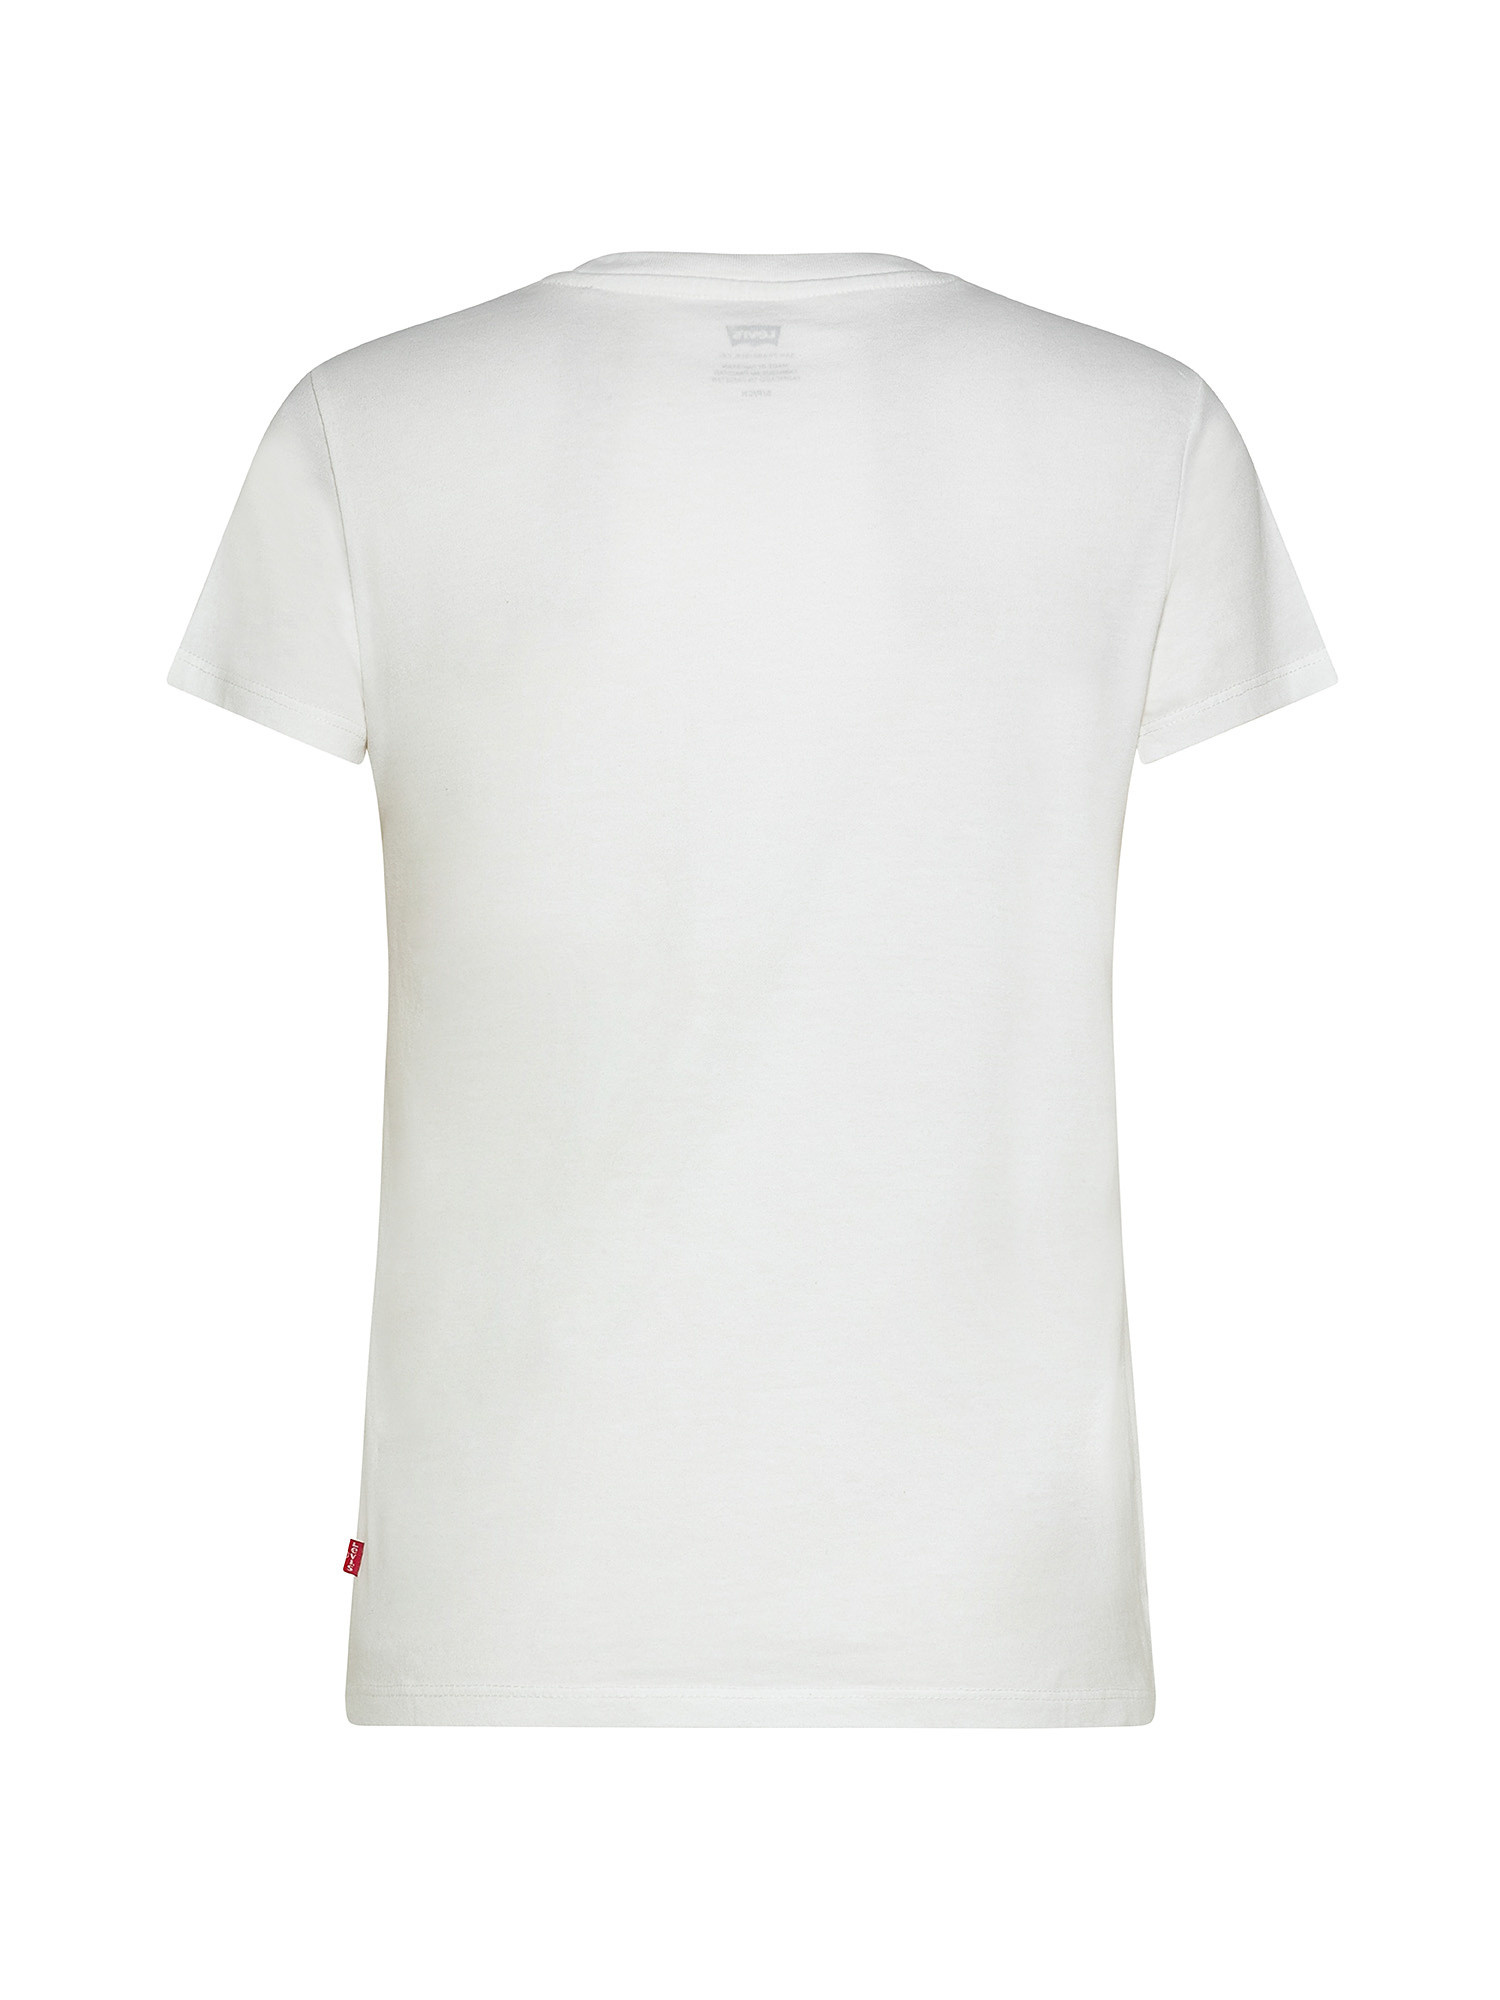 Perfect Tee, Bianco, large image number 1